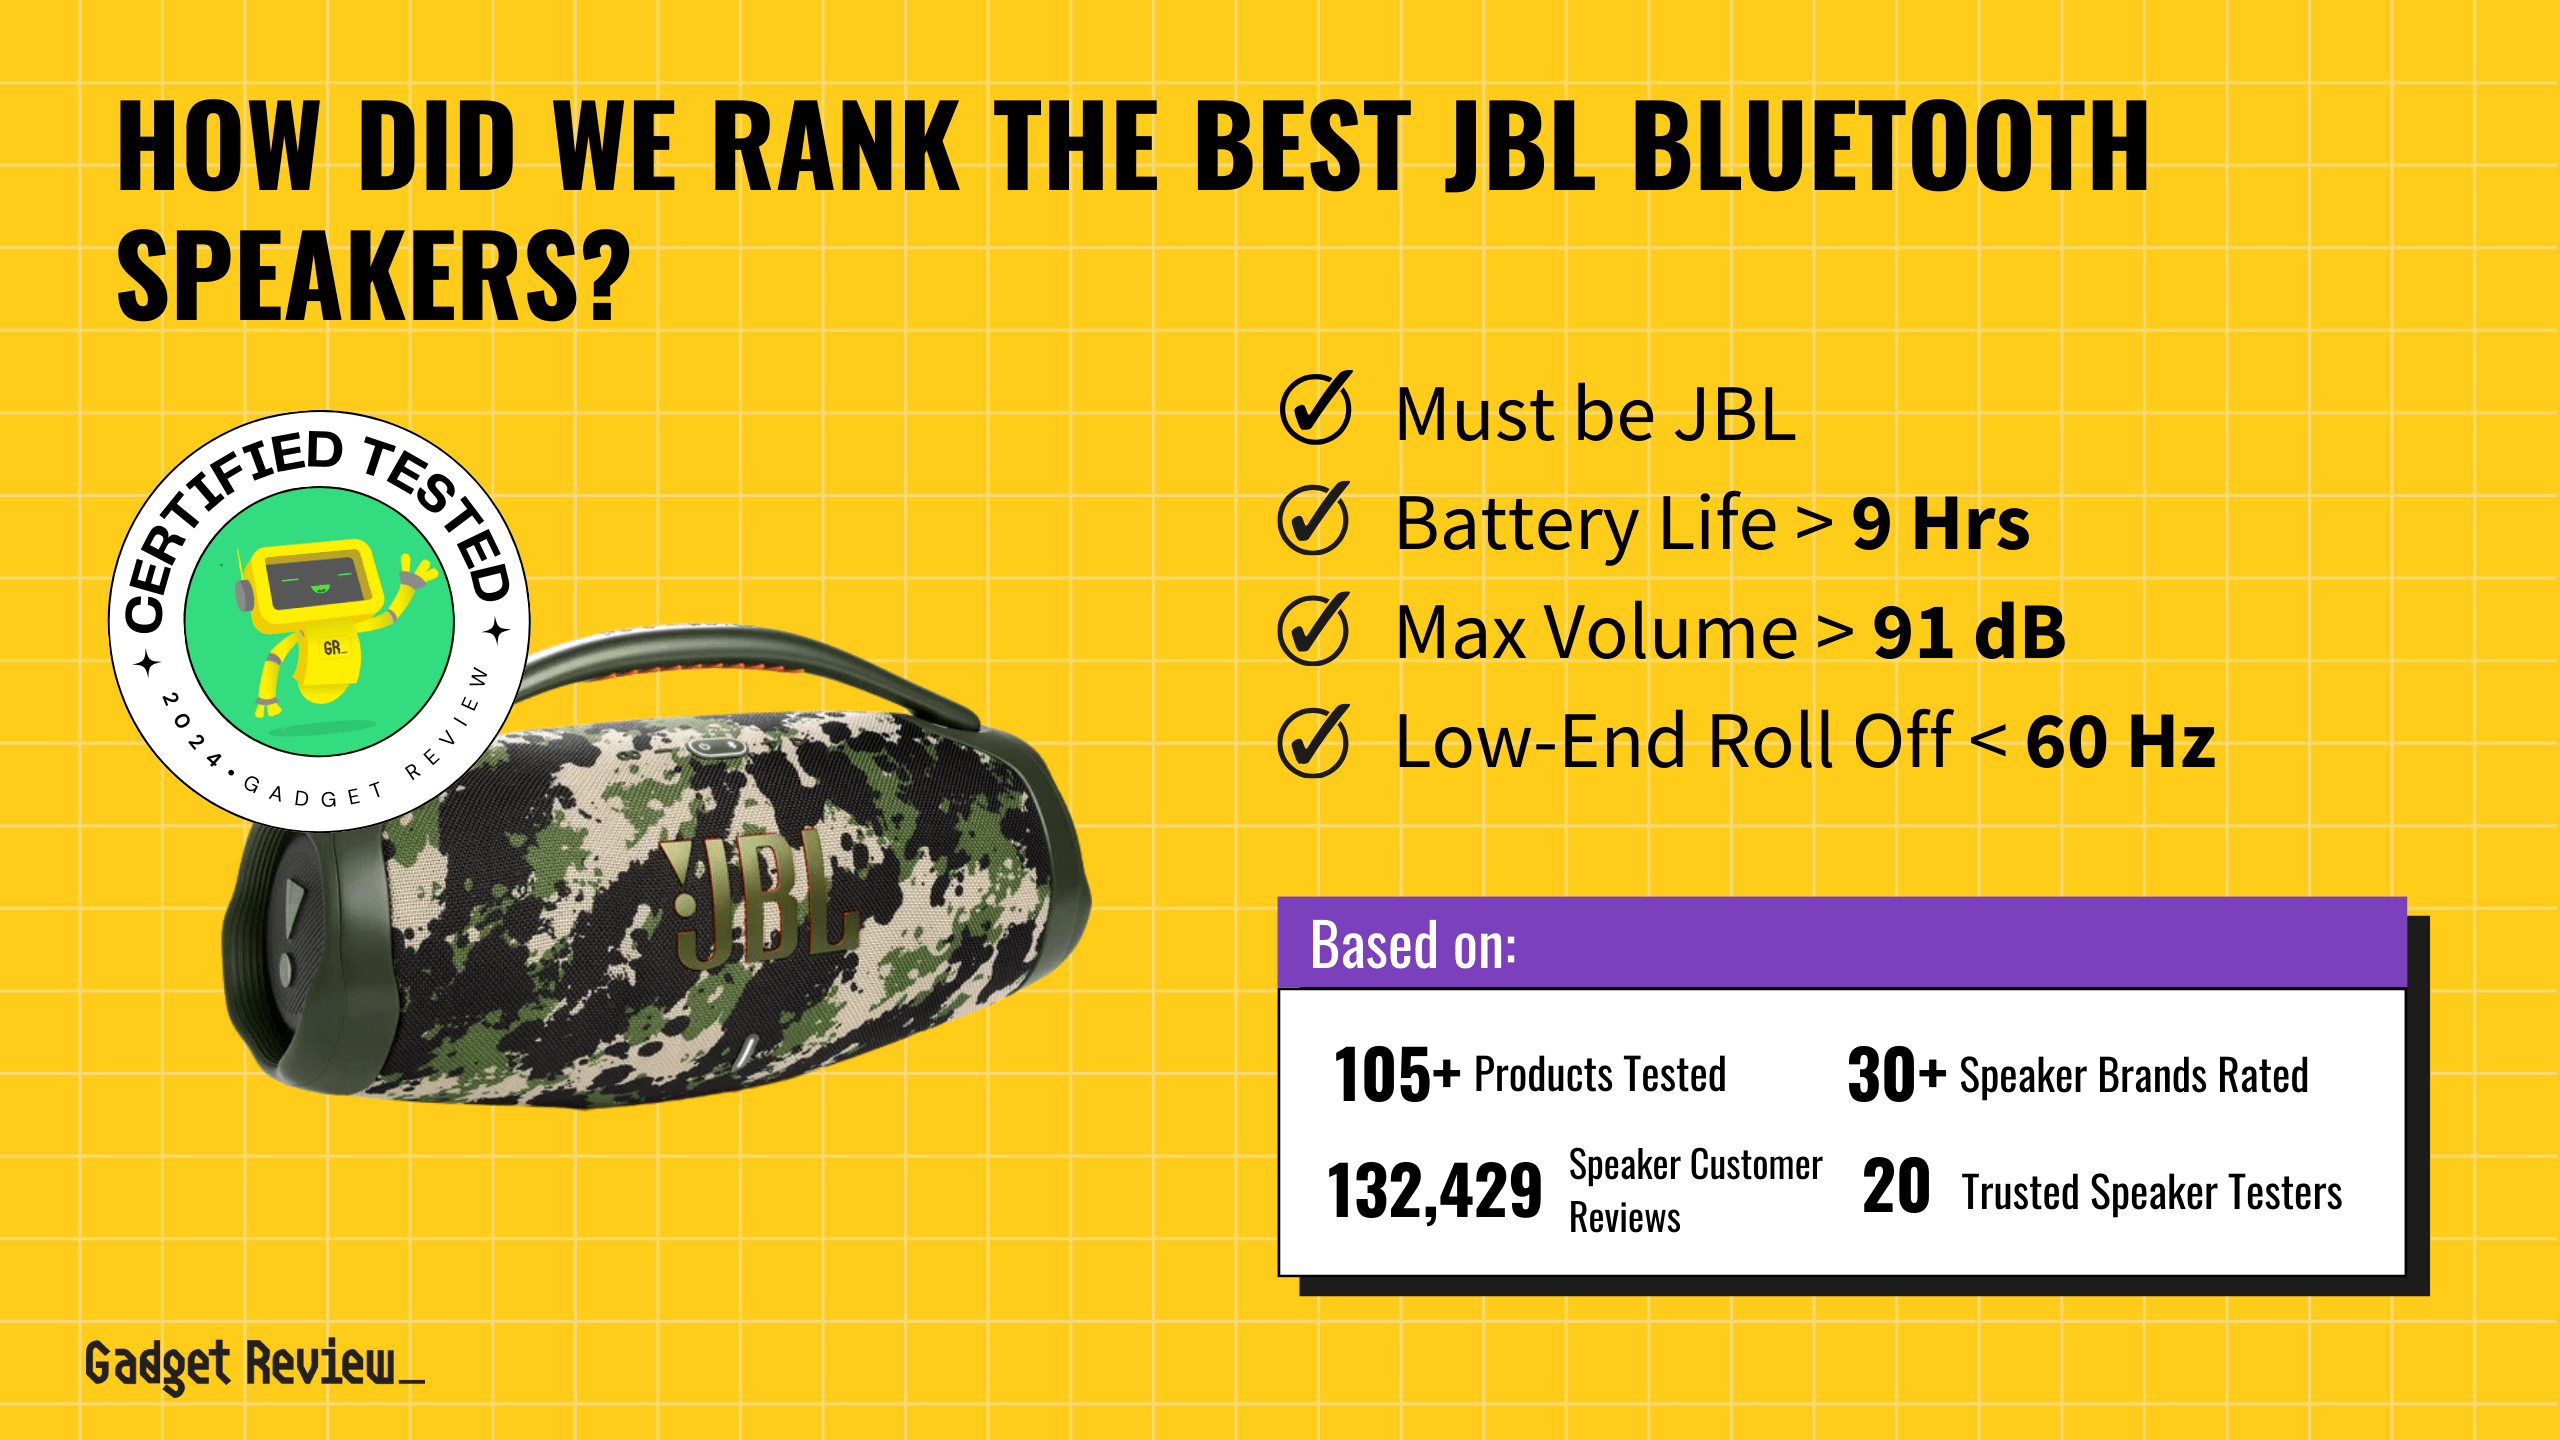 best jbl bluetooth speakers guide that shows the top best bluetooth speaker model